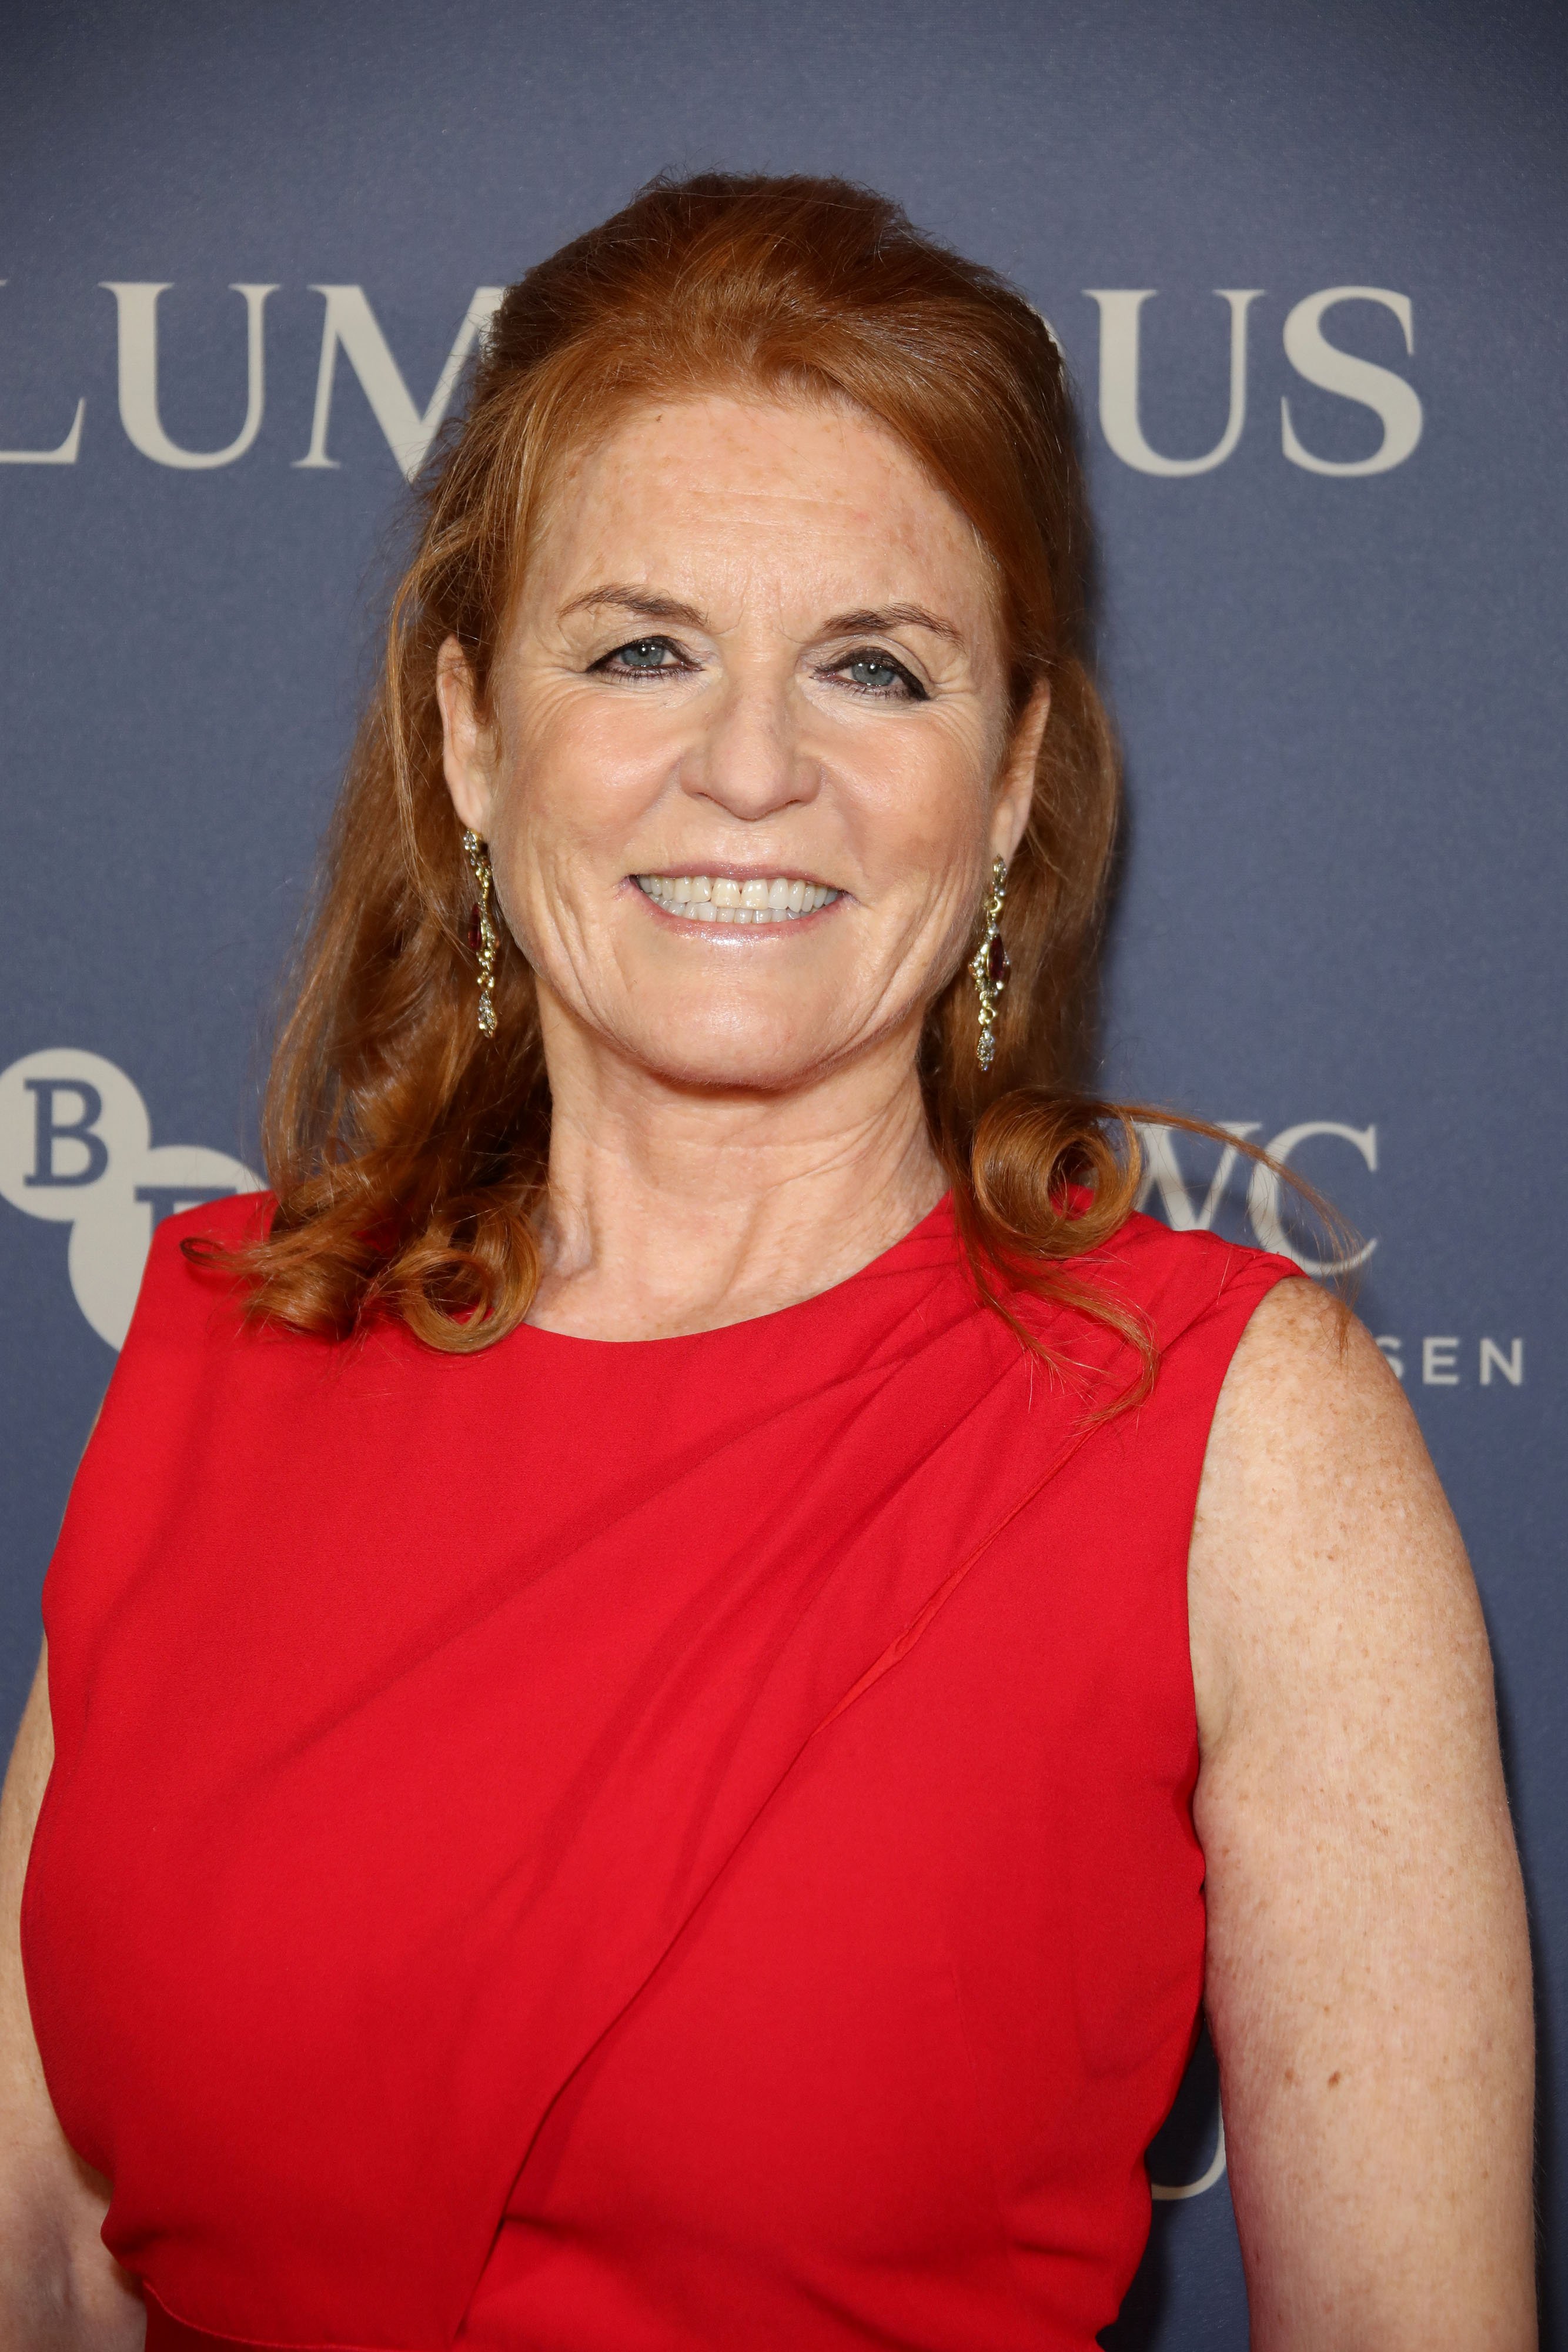 Sarah Ferguson attends the BFI Luminous Fundraising Gala at The Roundhouse on October 1, 2019, in London, England. | Source: Getty Images